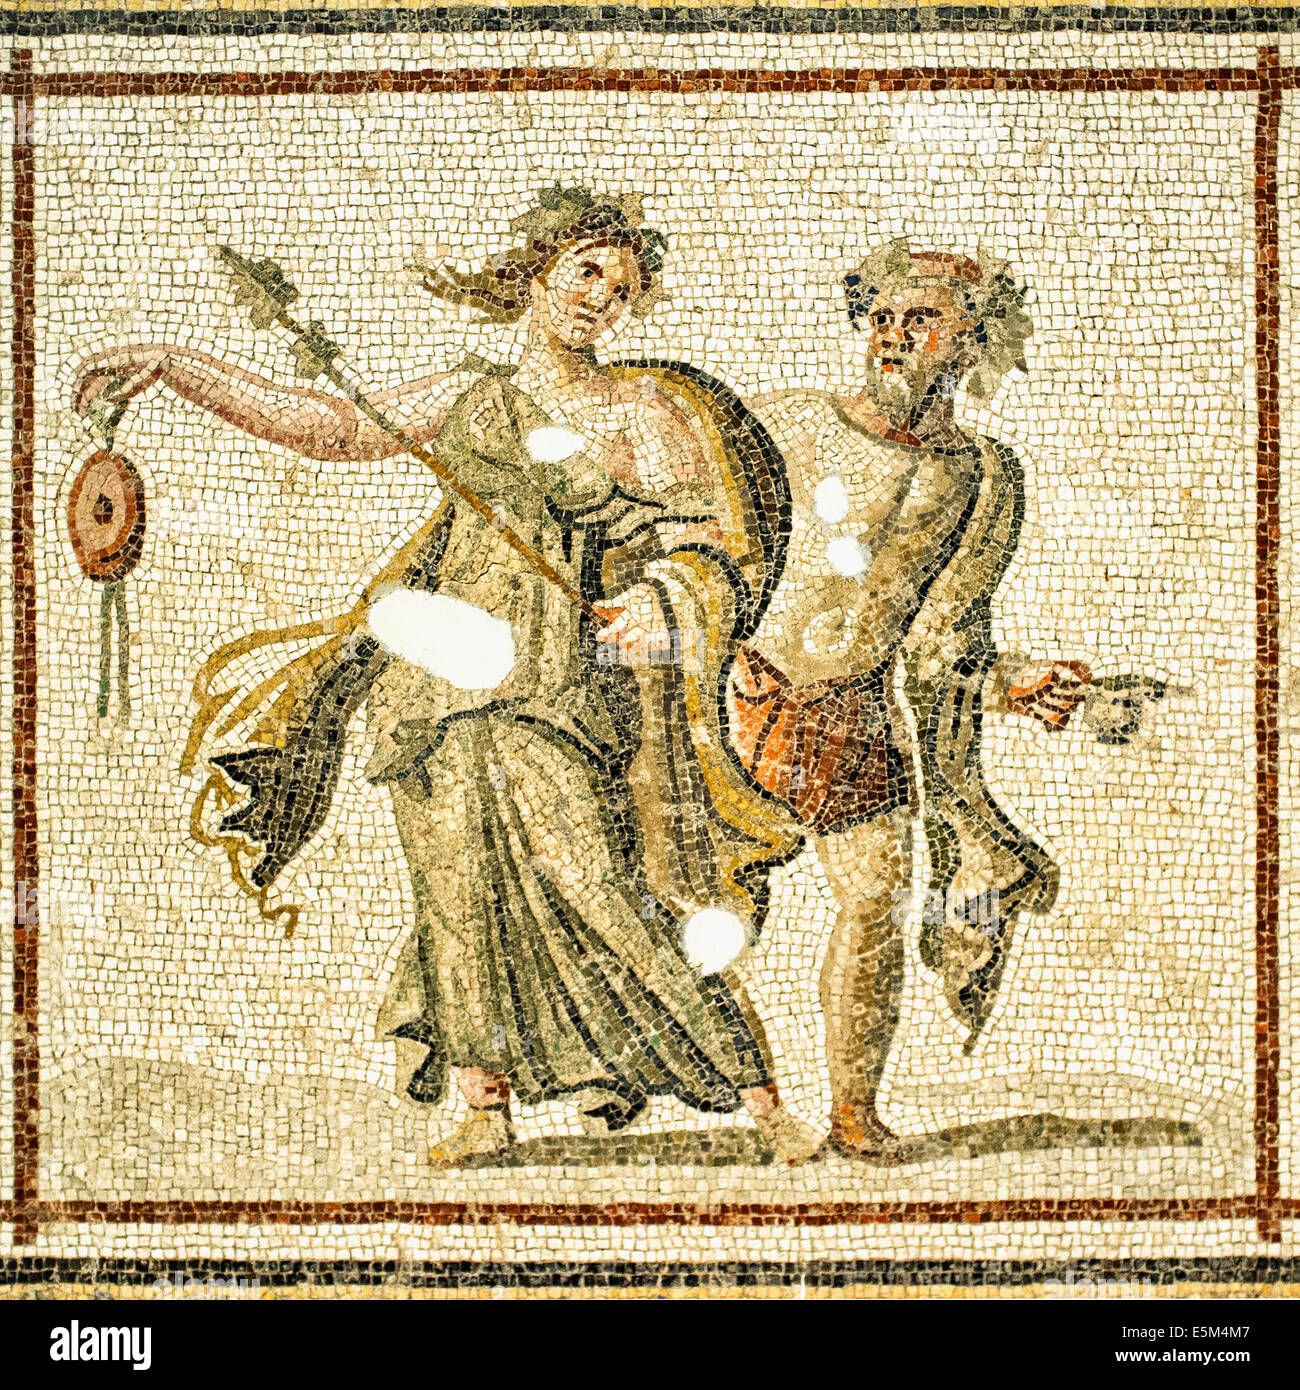 Mosaic of Bacchic dancers, 2nd Cent A.C., Hatay Archaeology Museum, Antioch, Hatay province, Southwest Turkey Stock Photo